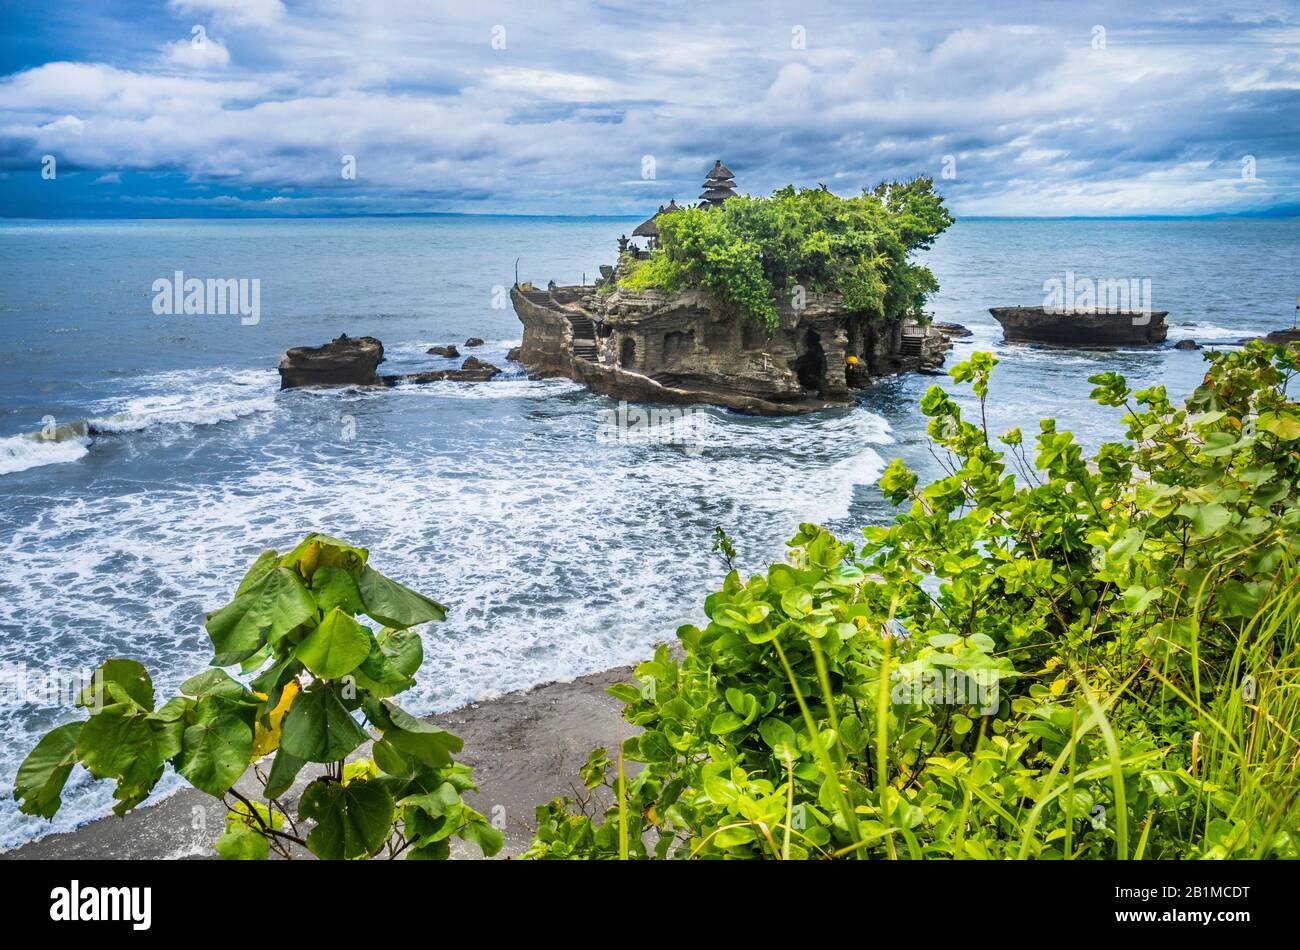 view of Tanah Lot, a rock formation off the Indonesian island of Bali, home to an ancient Hindu pilgrimage temple Pura Tanah Lot, Bali, Indonesia Stock Photo